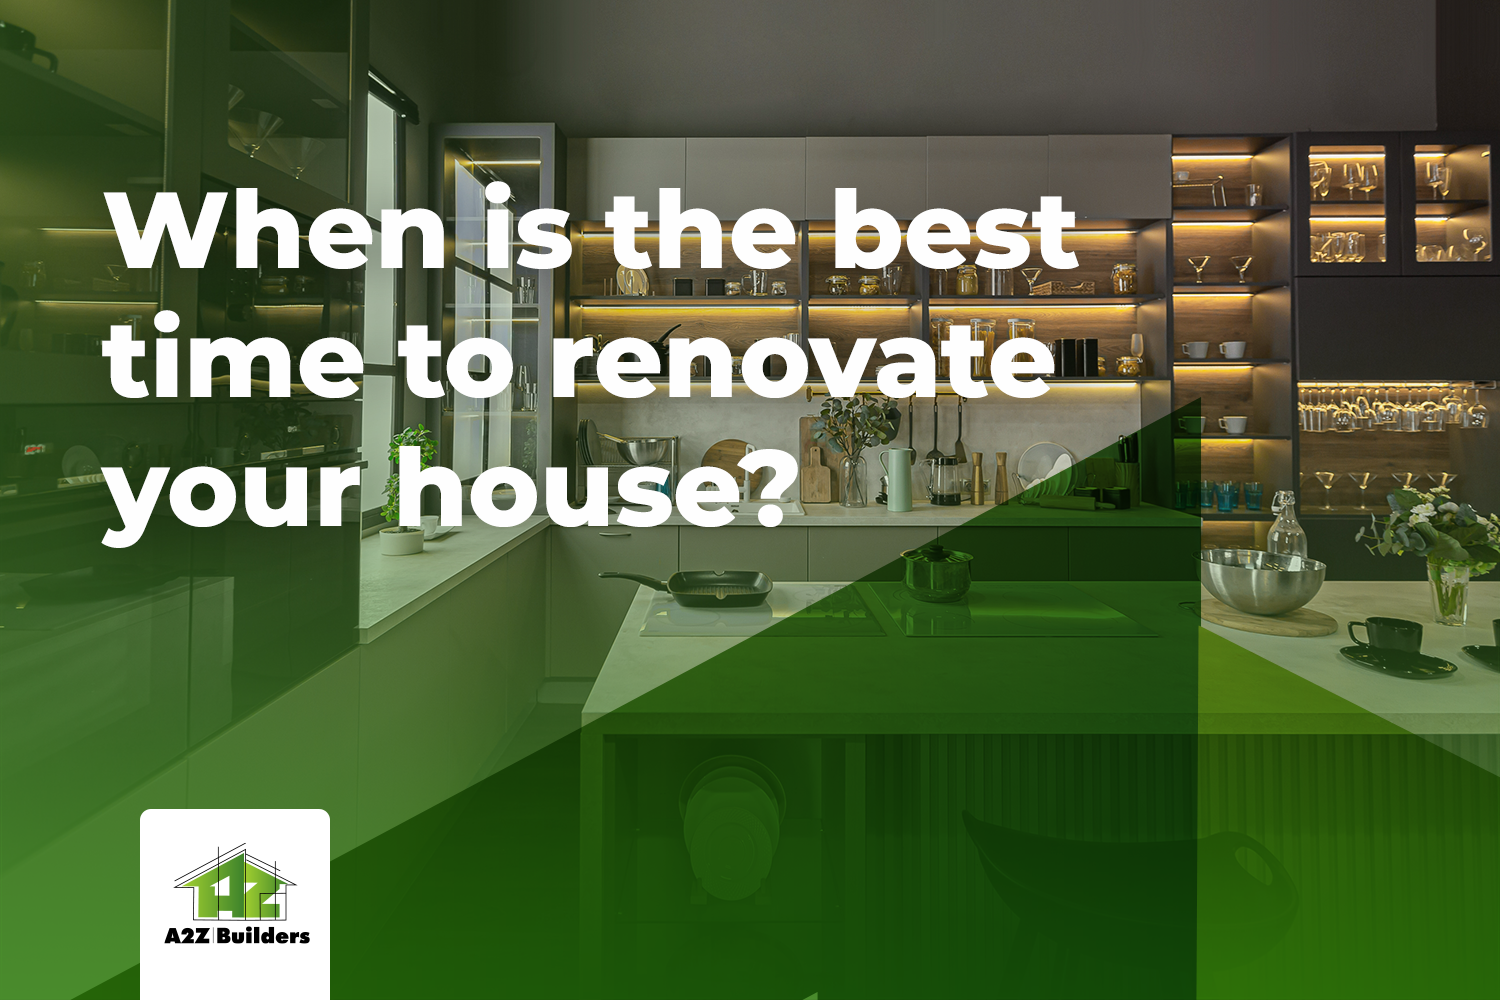 Blog-1--What-month-is-the-best-to-renovate-a-house